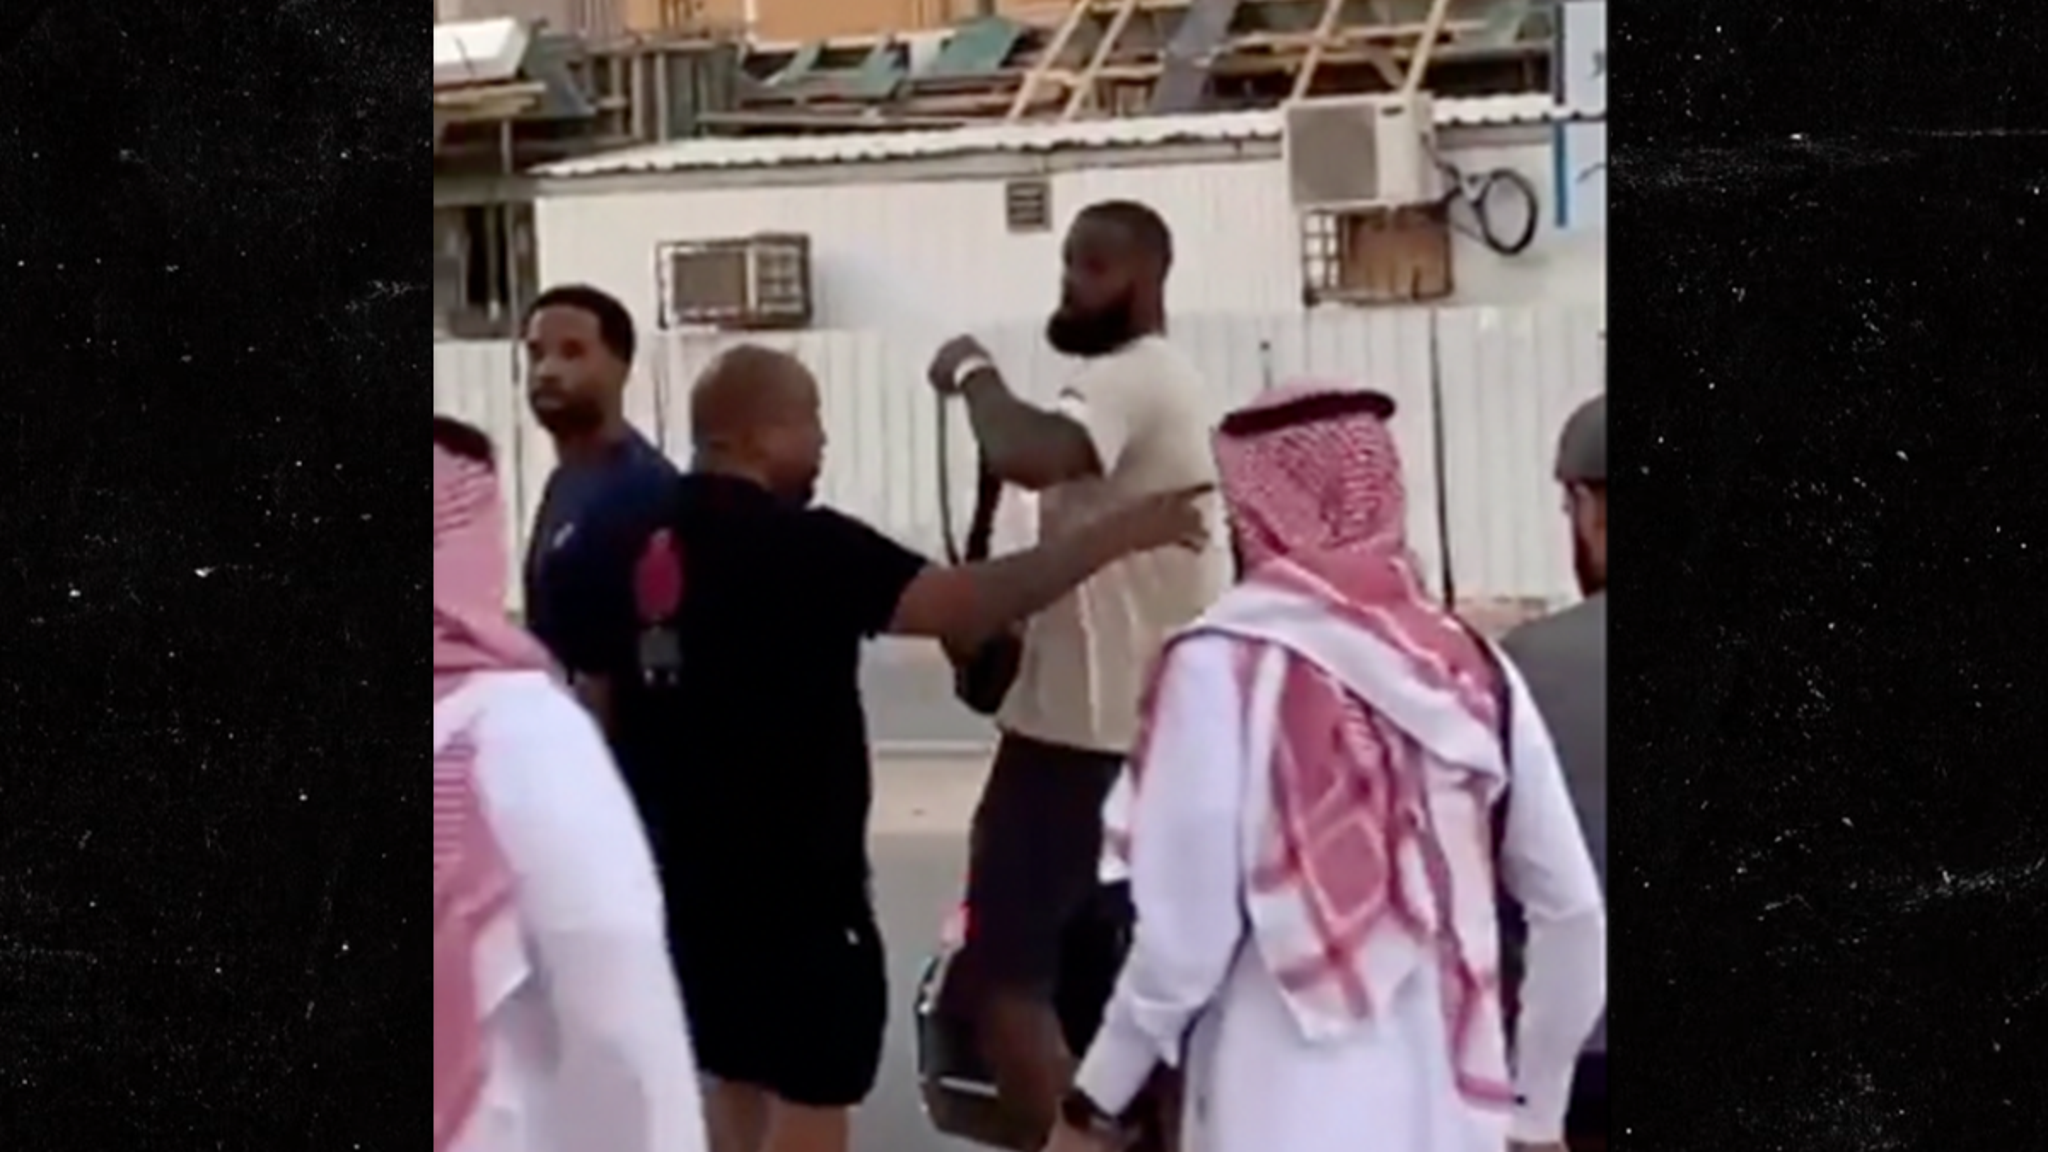 LeBron James Spotted In Saudi Arabia Weeks After Joking He’d Play There